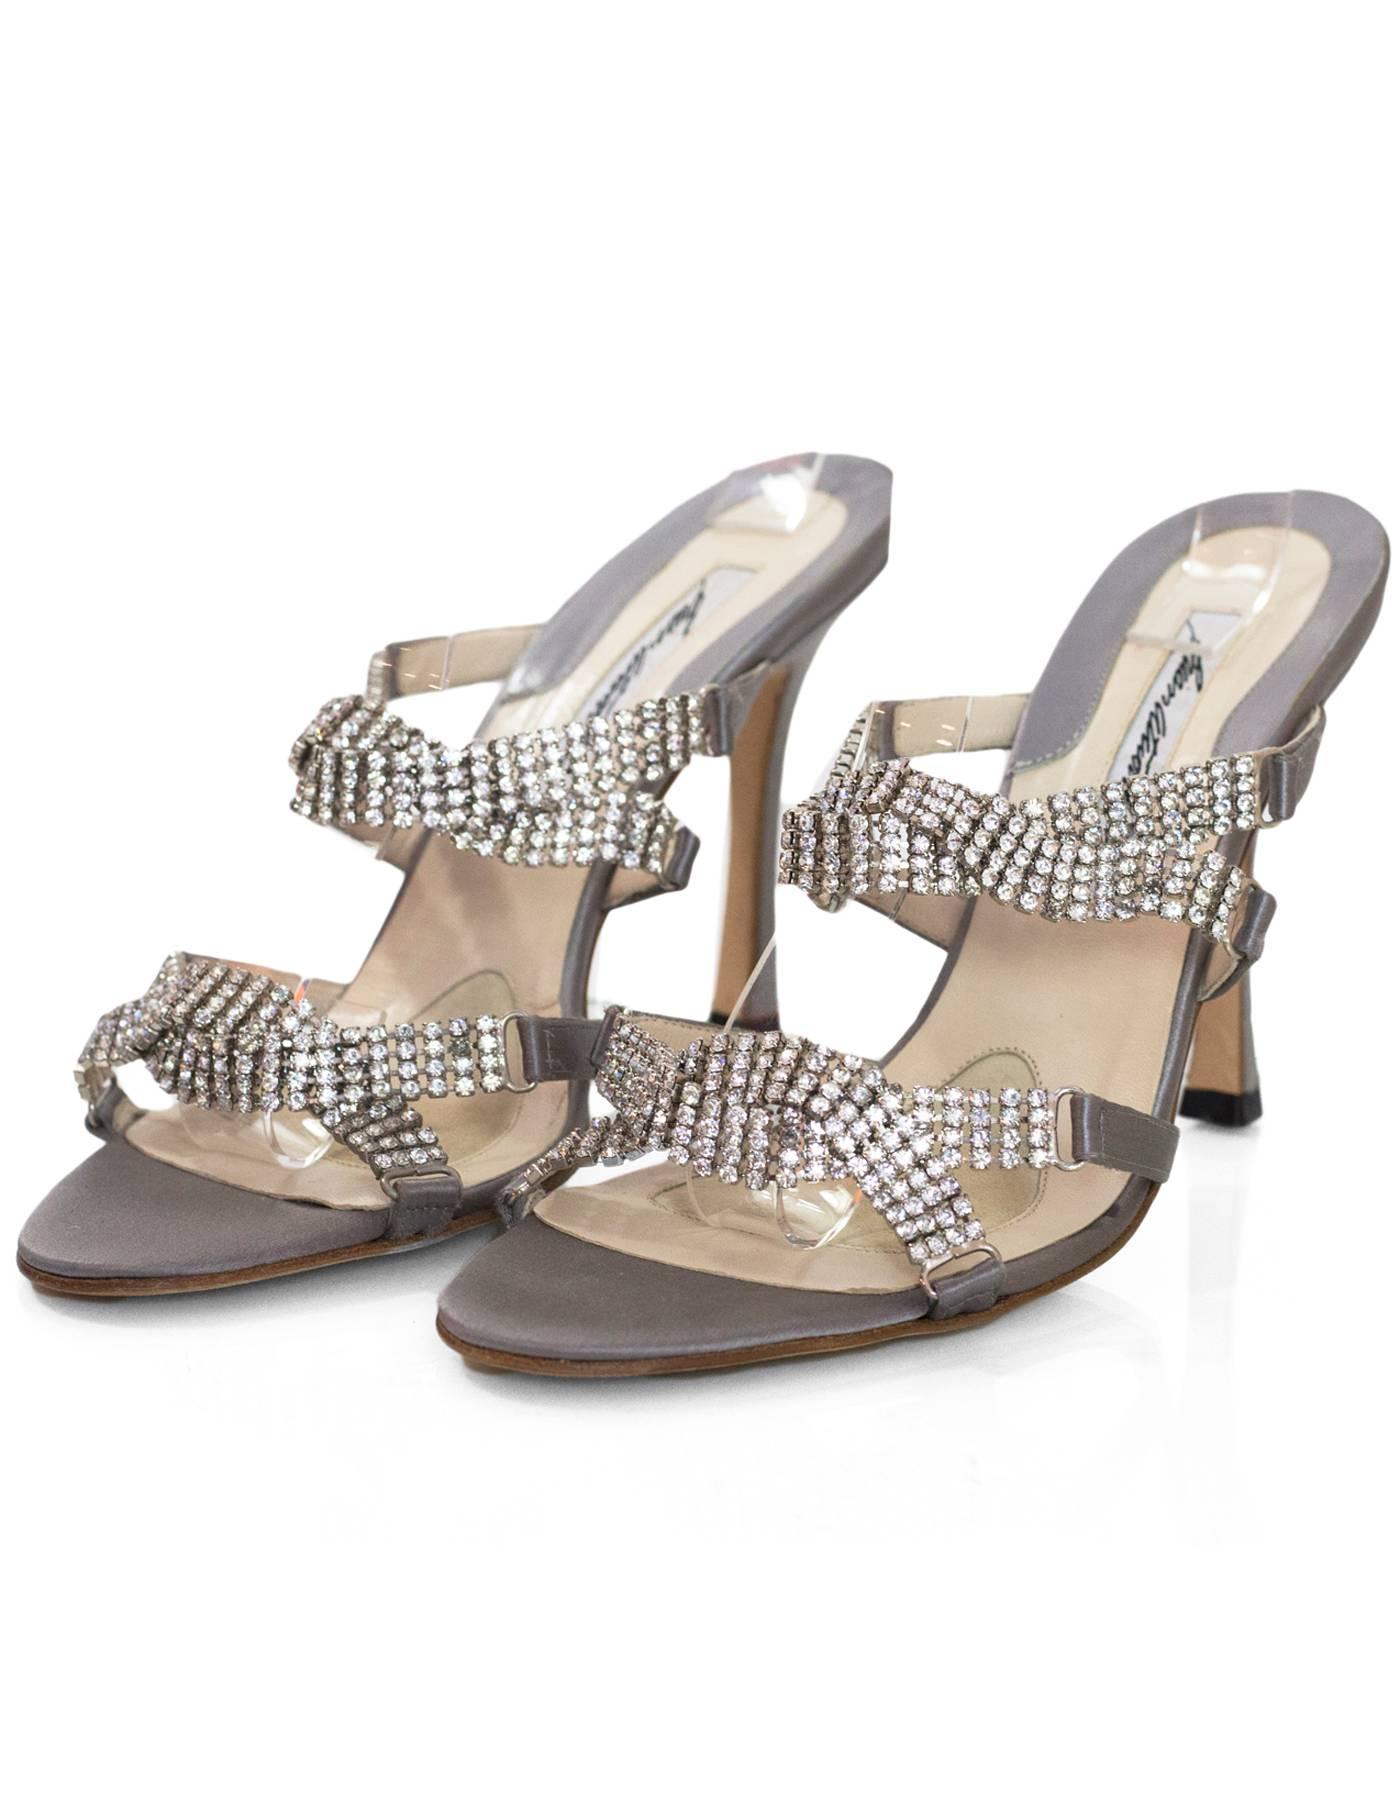 Brian Atwood Grey Satin & Pave Crystal Sandals Sz 39 NEW

Made In: Italy
Color: Grey
Materials: Satin, crystal
Closure/Opening: Slide on
Sole Stamp: Brian Atwood vero cuoio made in Italy 39
Overall Condition: Excellent pre-owned condition - NEW,